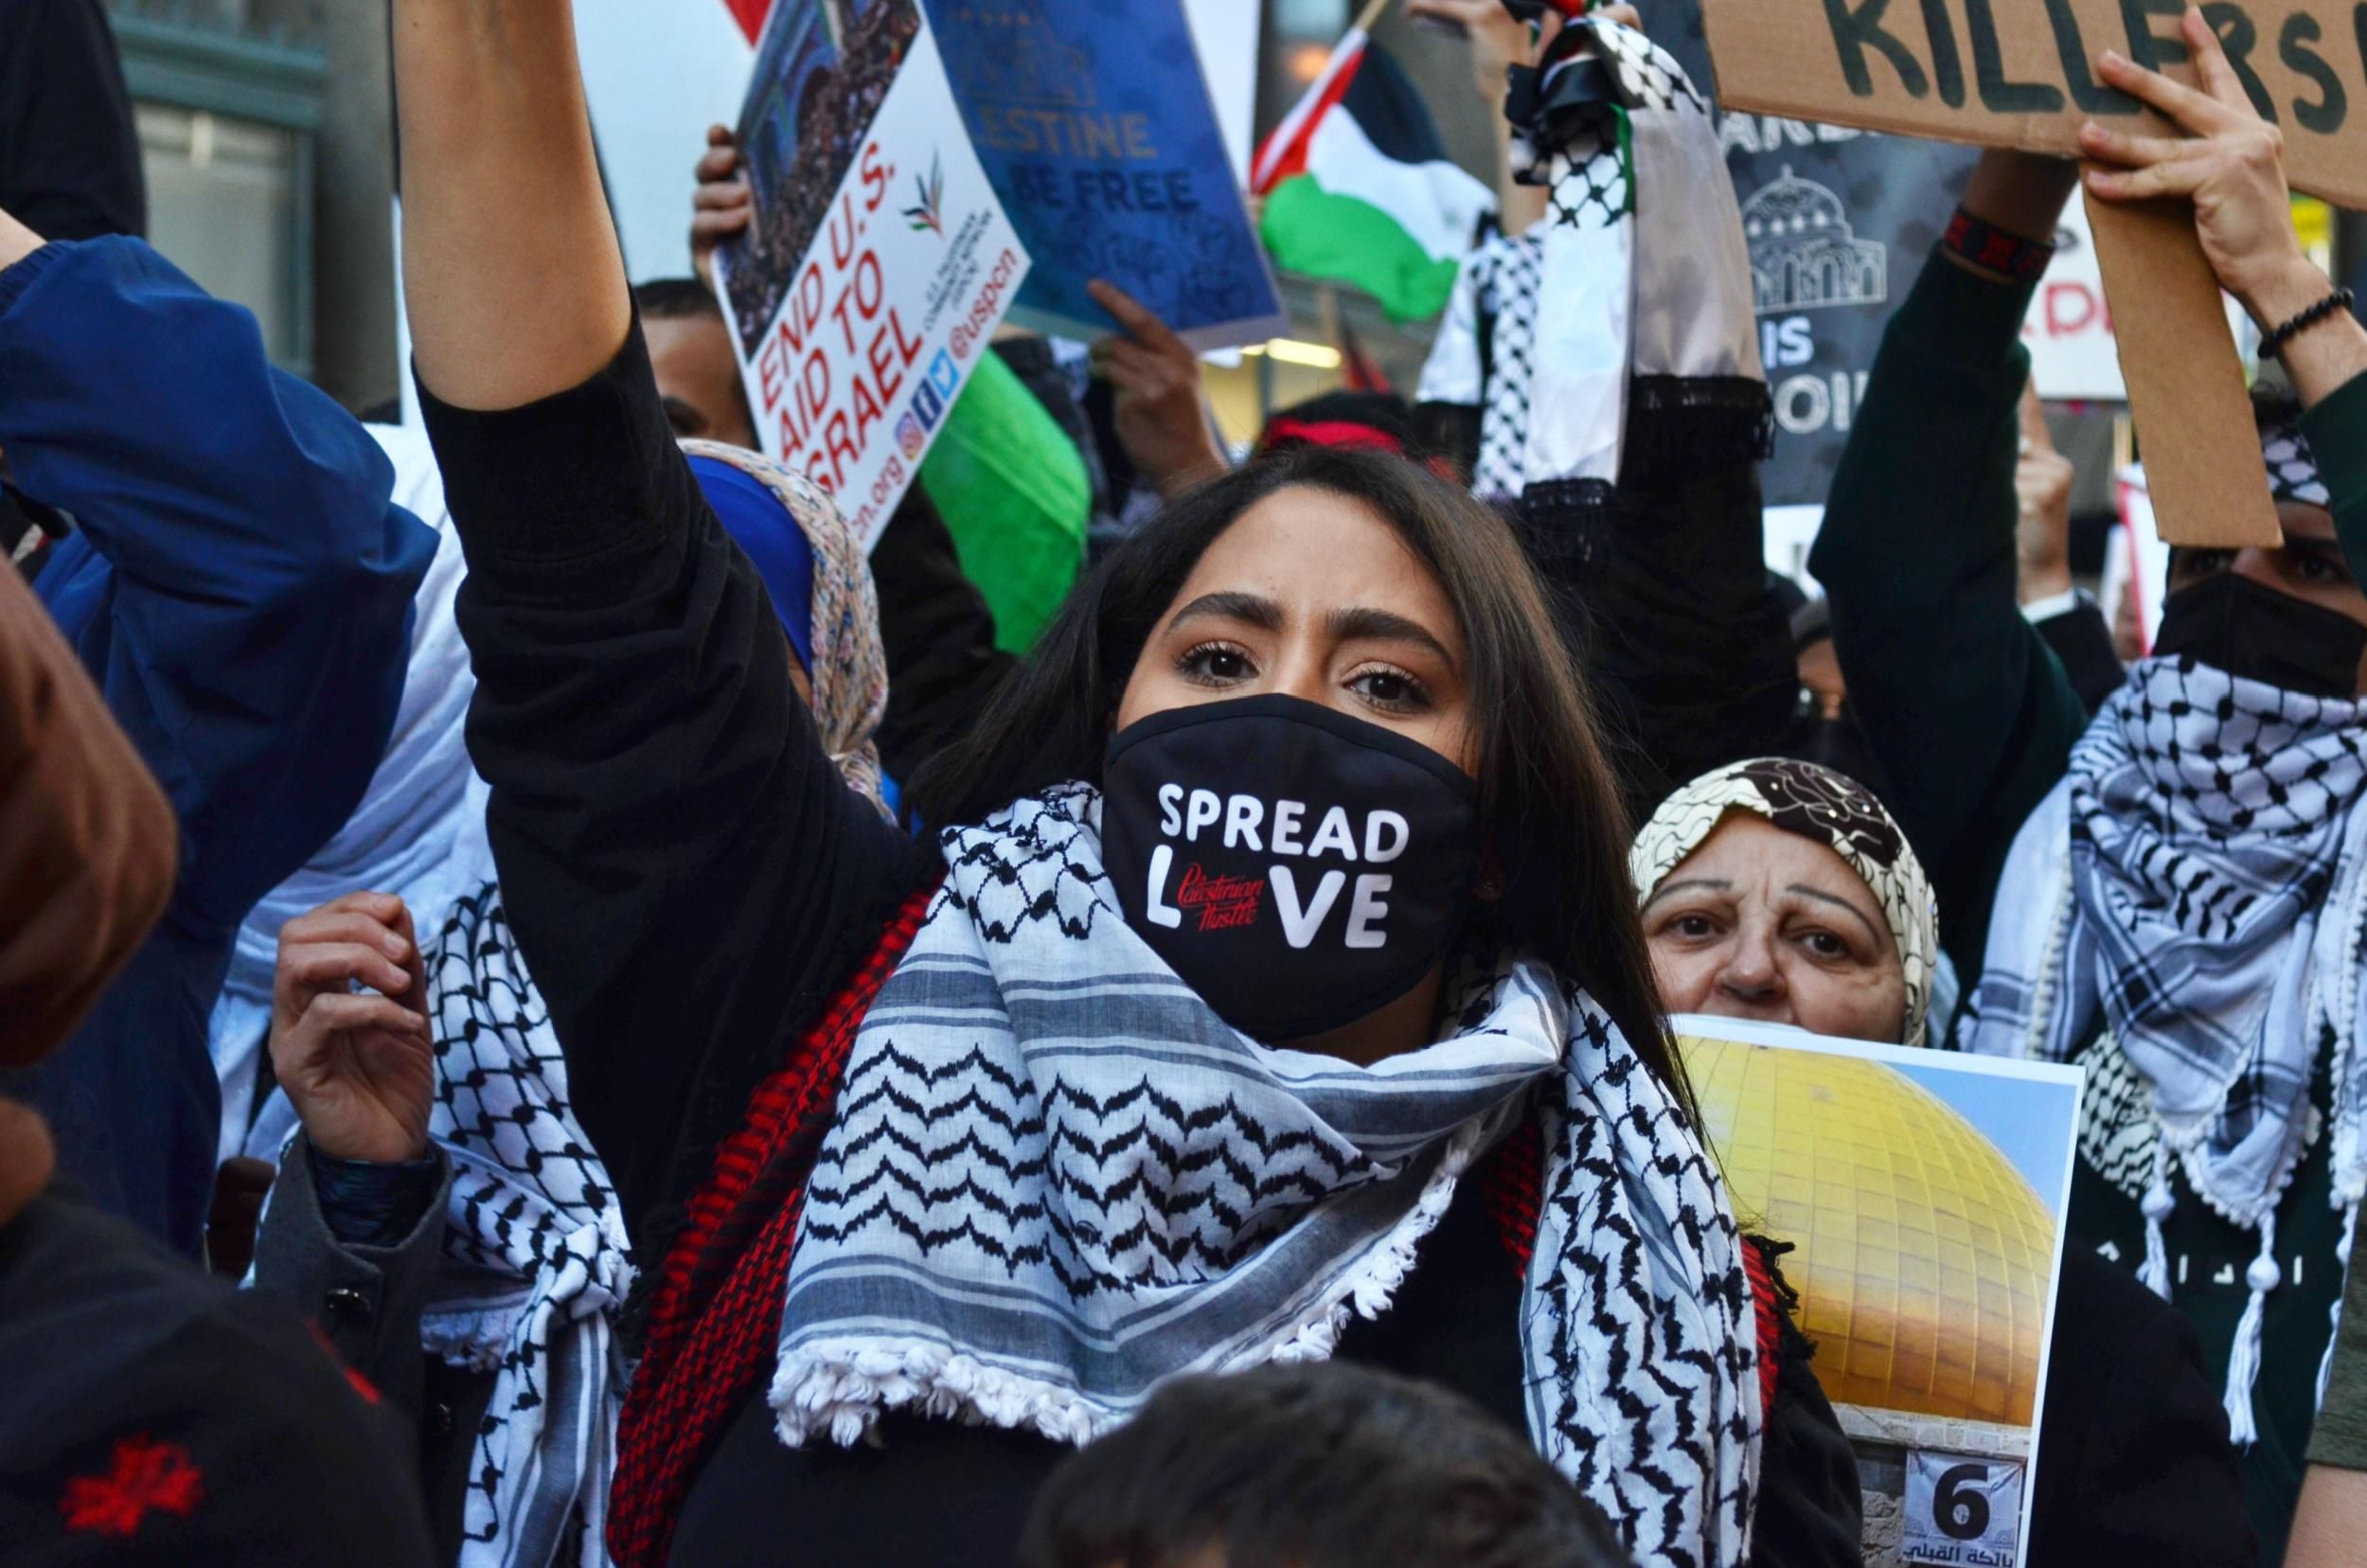 People protest against Israeli forces' attacks on Palestinians at the Al-Aqsa Mosque and in the Gaza Strip in Chicago on May 13, 2021. (Photo: Askin Kiyagan/Anadolu Agency via Getty Images)